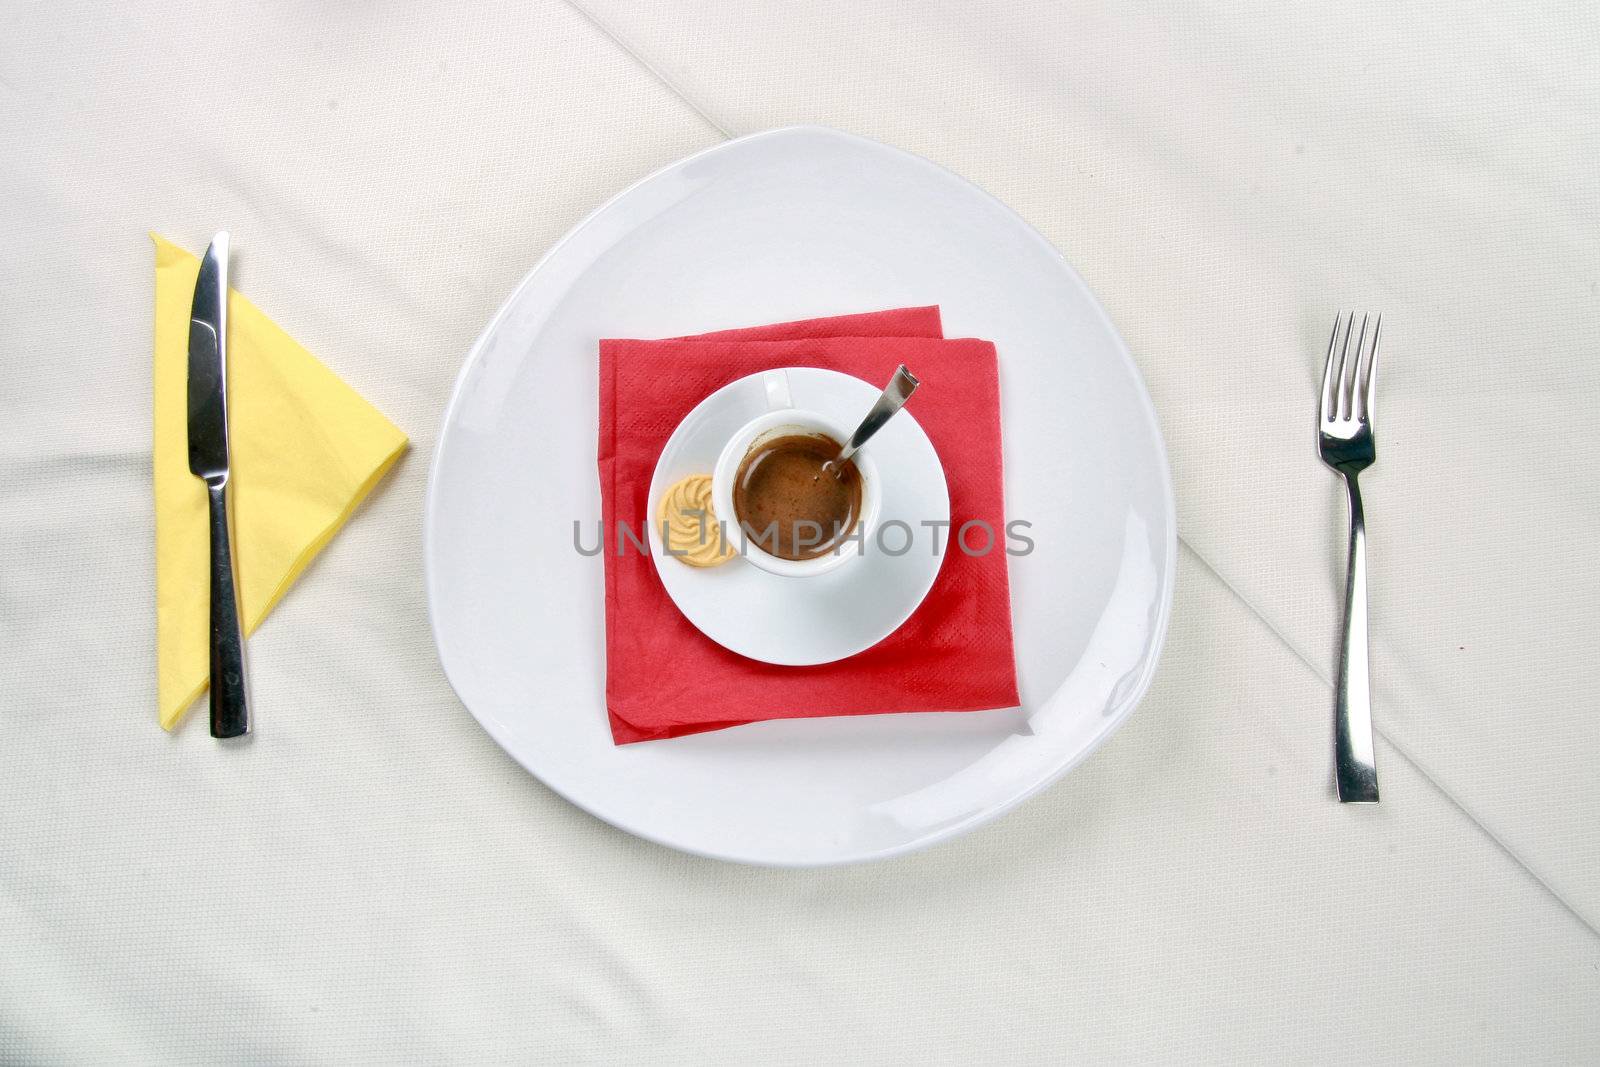 A plate with a cup of coffee on it